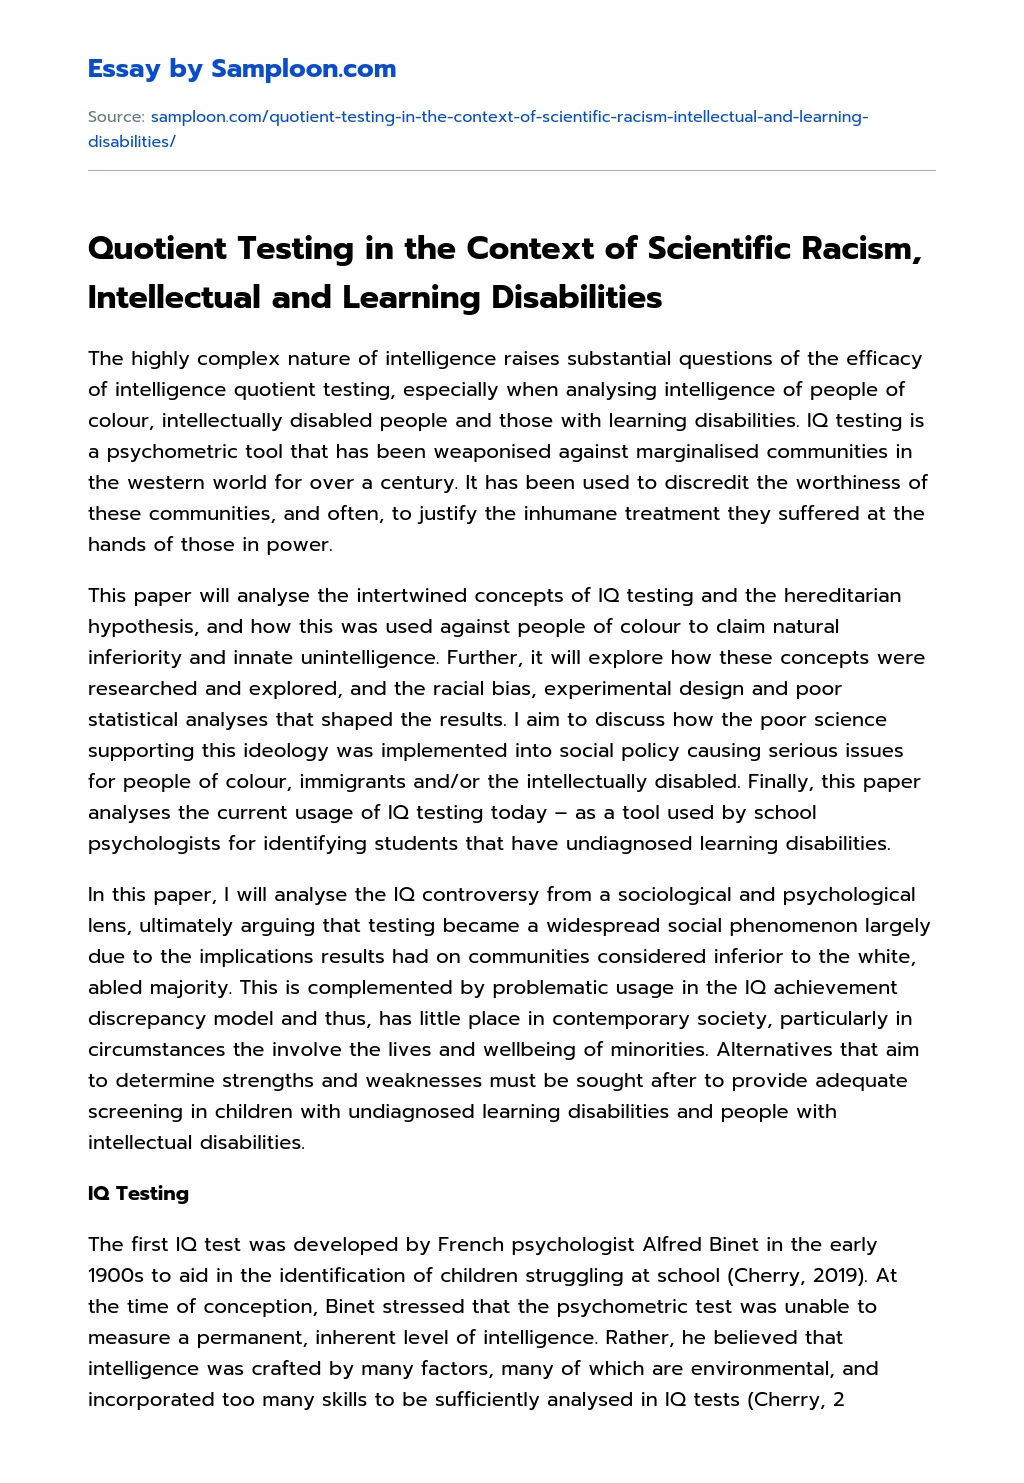 Quotient Testing in the Context of Scientific Racism, Intellectual and Learning Disabilities essay